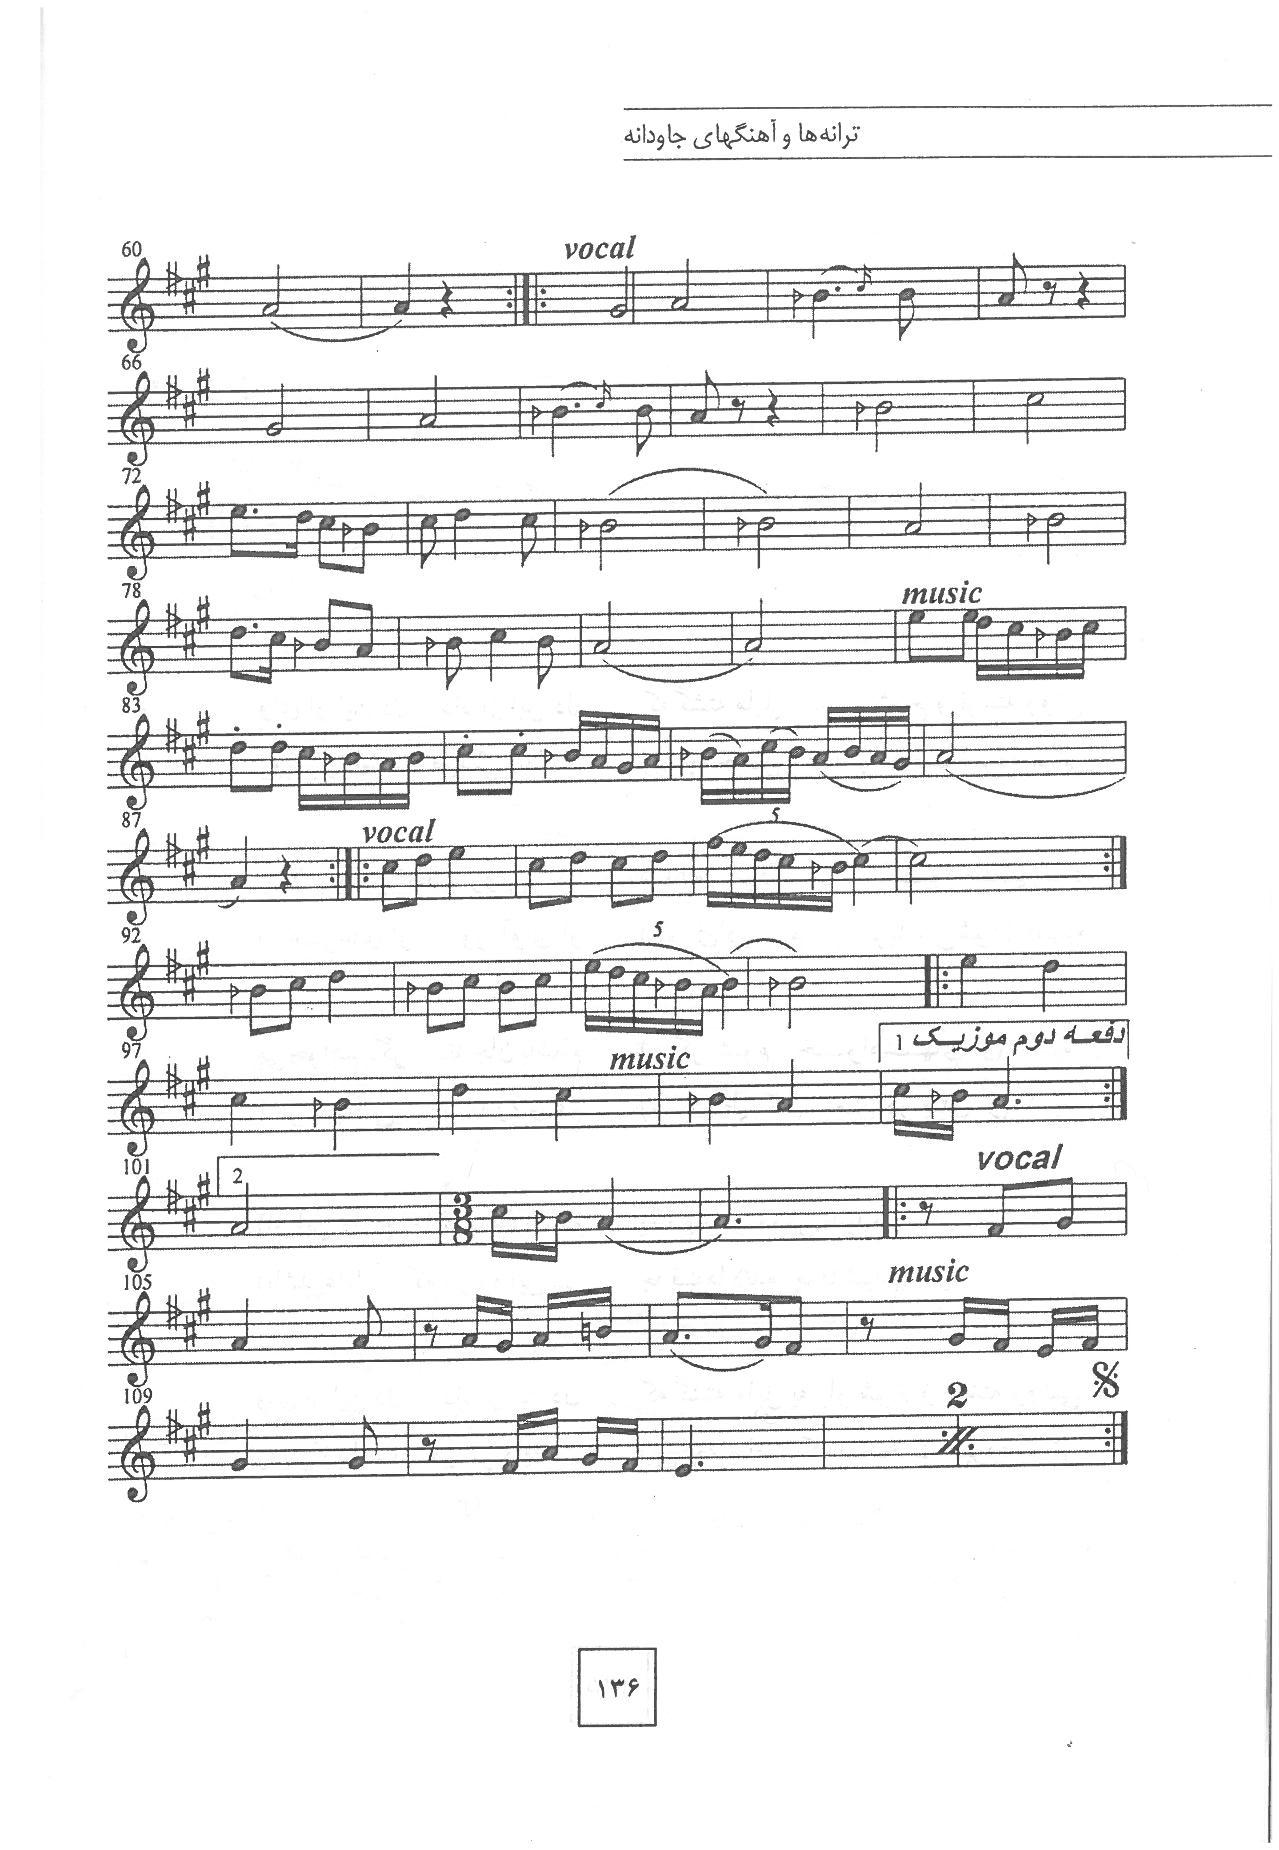 A sheet music page with many notes and lines.